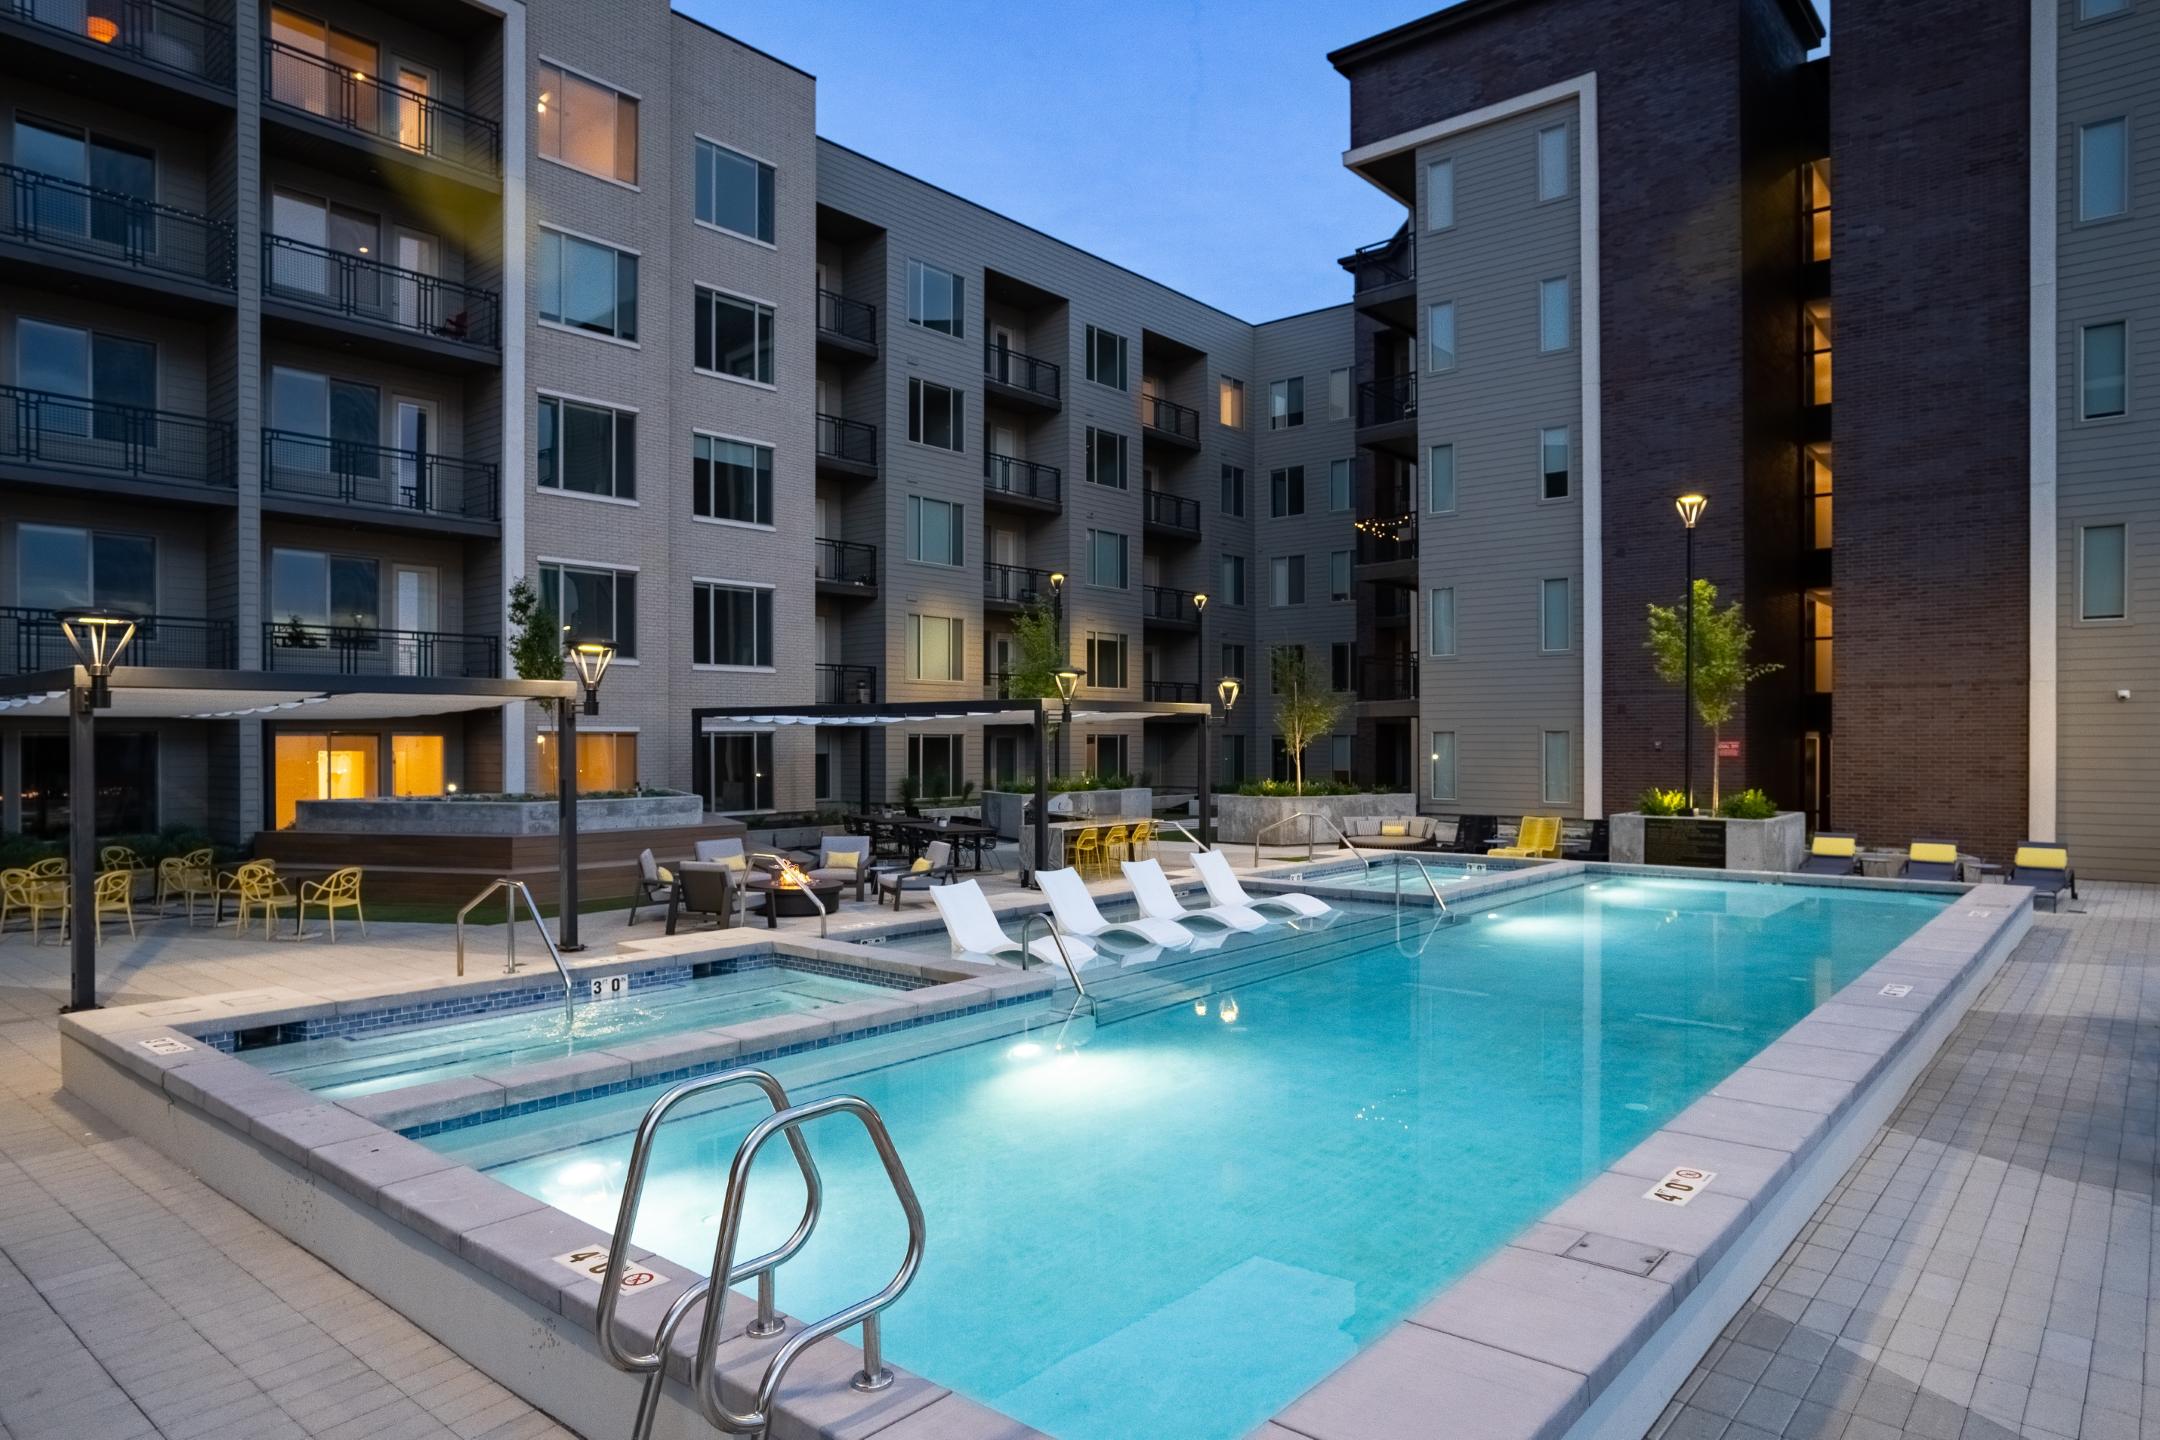 swimming pool at apartment complex